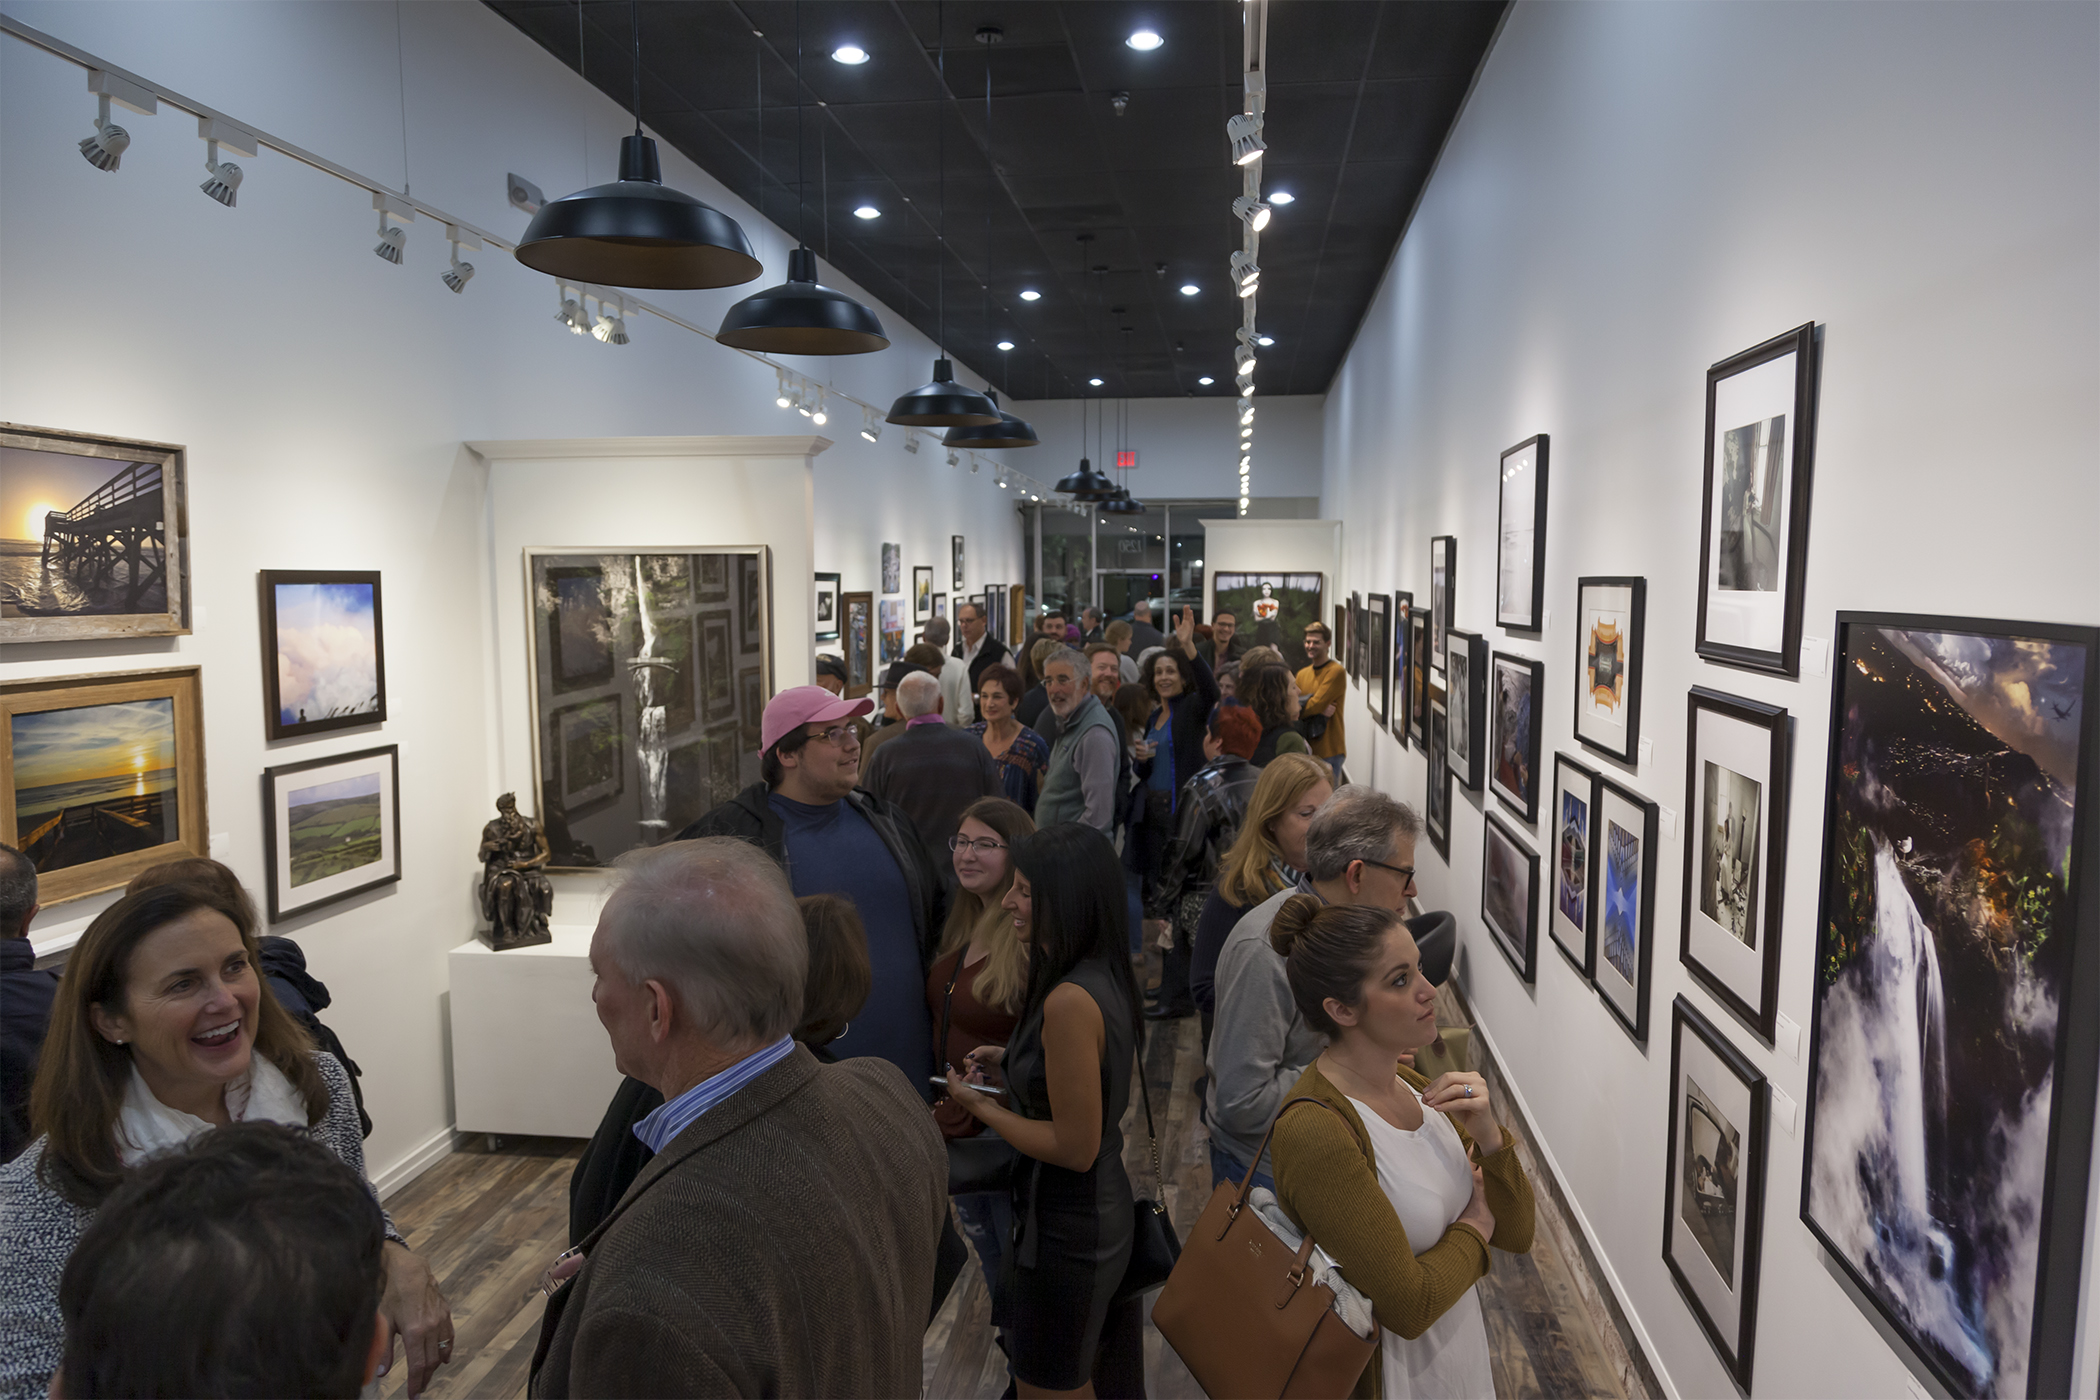 9th Annual “Local Exposure” Photography Competition